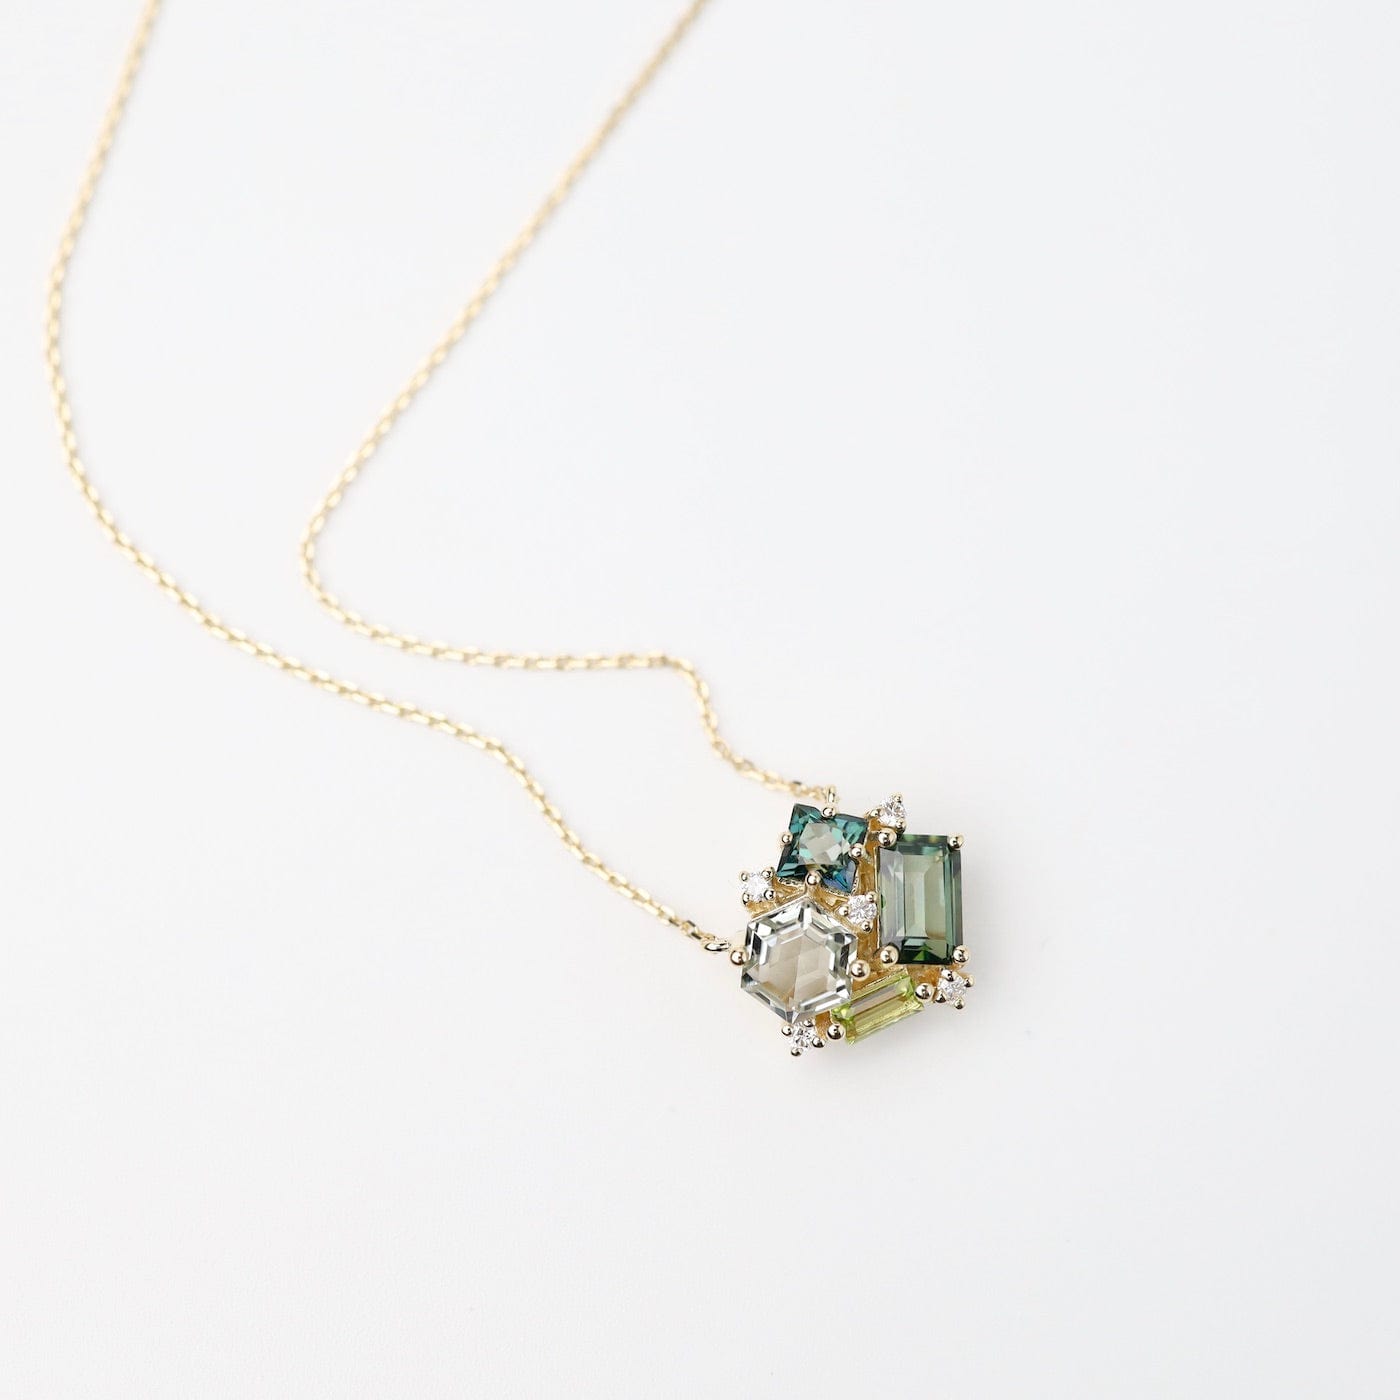 NKL-14K Yellow Gold Green Cluster Necklace